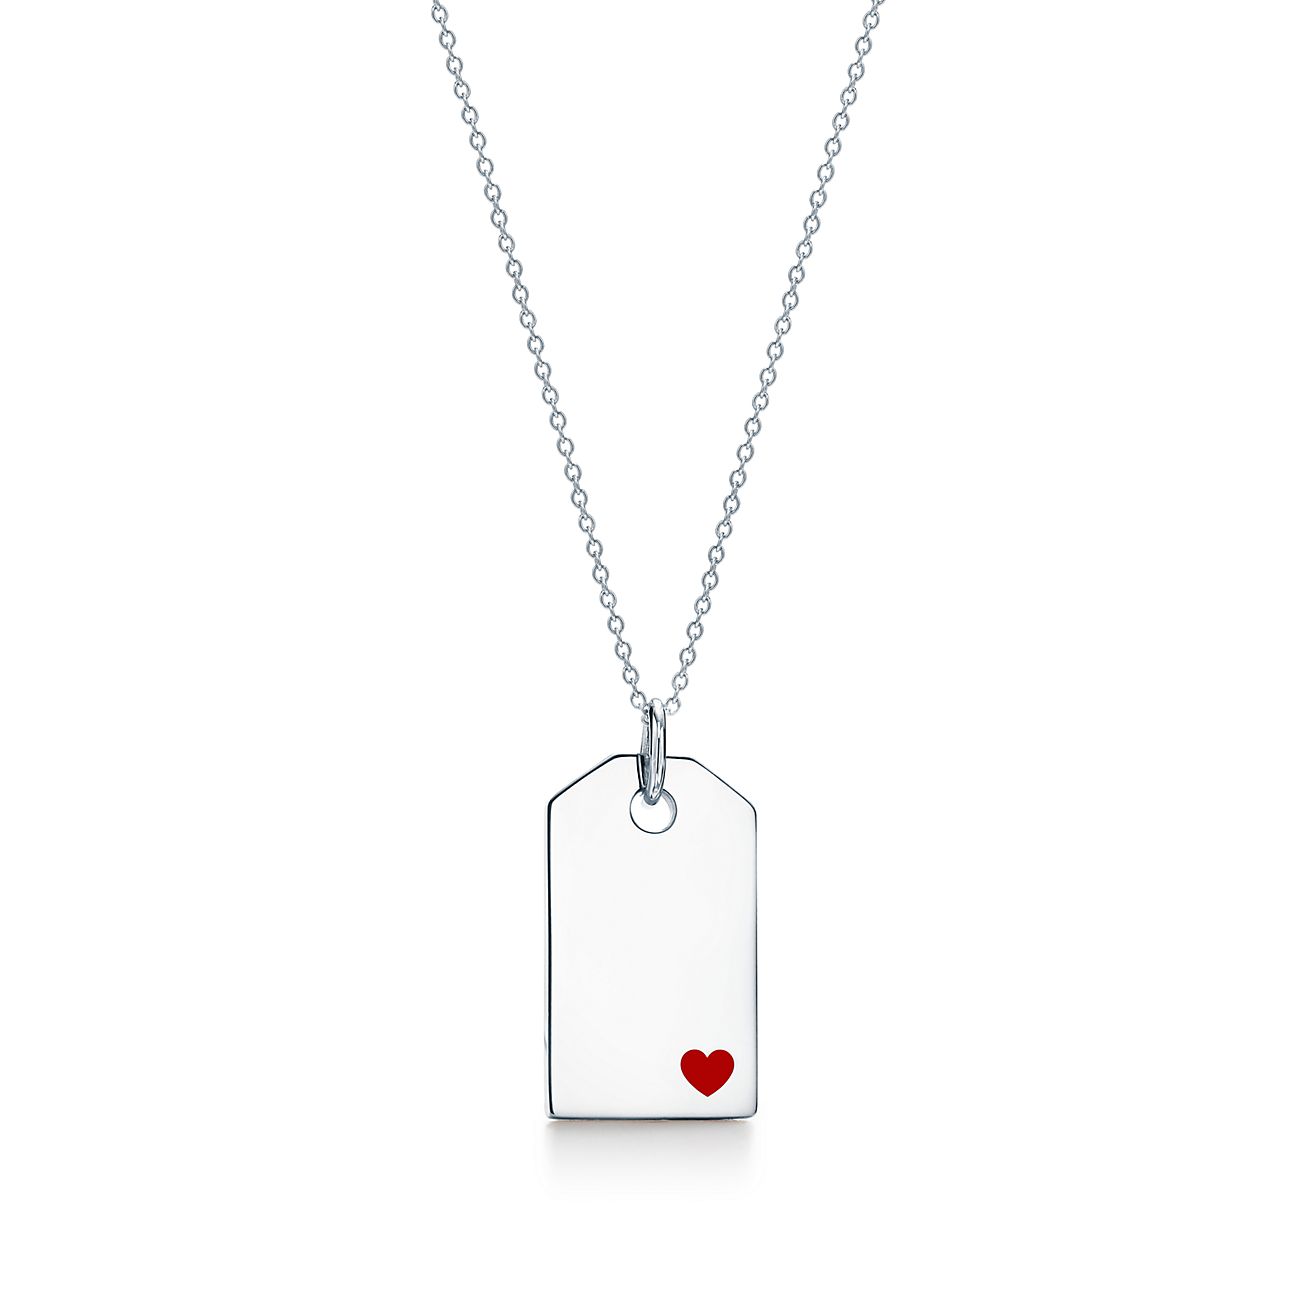 tiffany heart necklace red